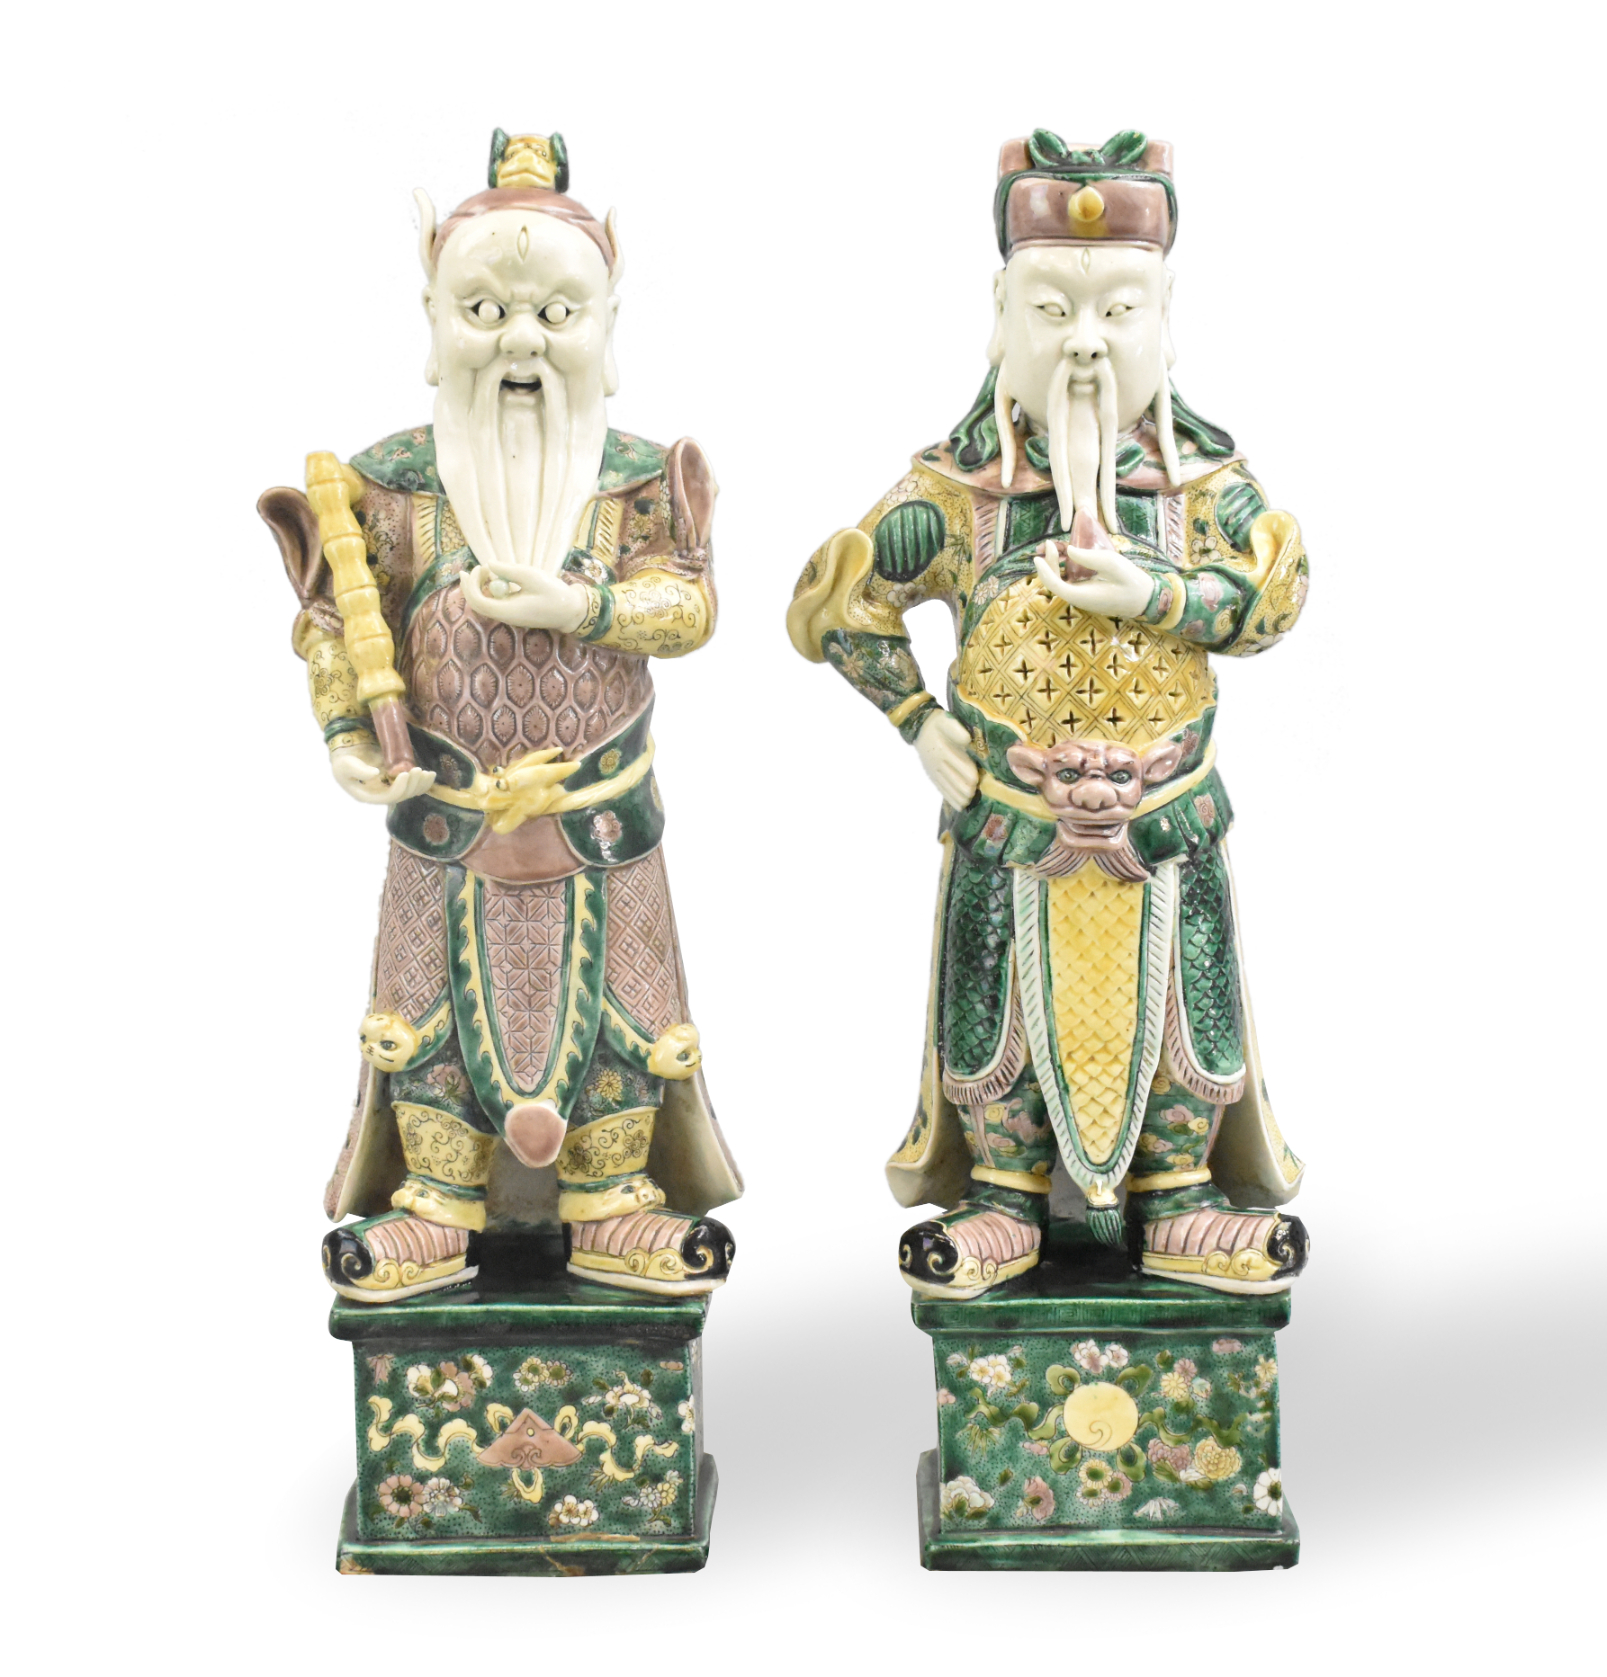 PAIR OF CHINESE GUARDIAN FIGURES  3017bb